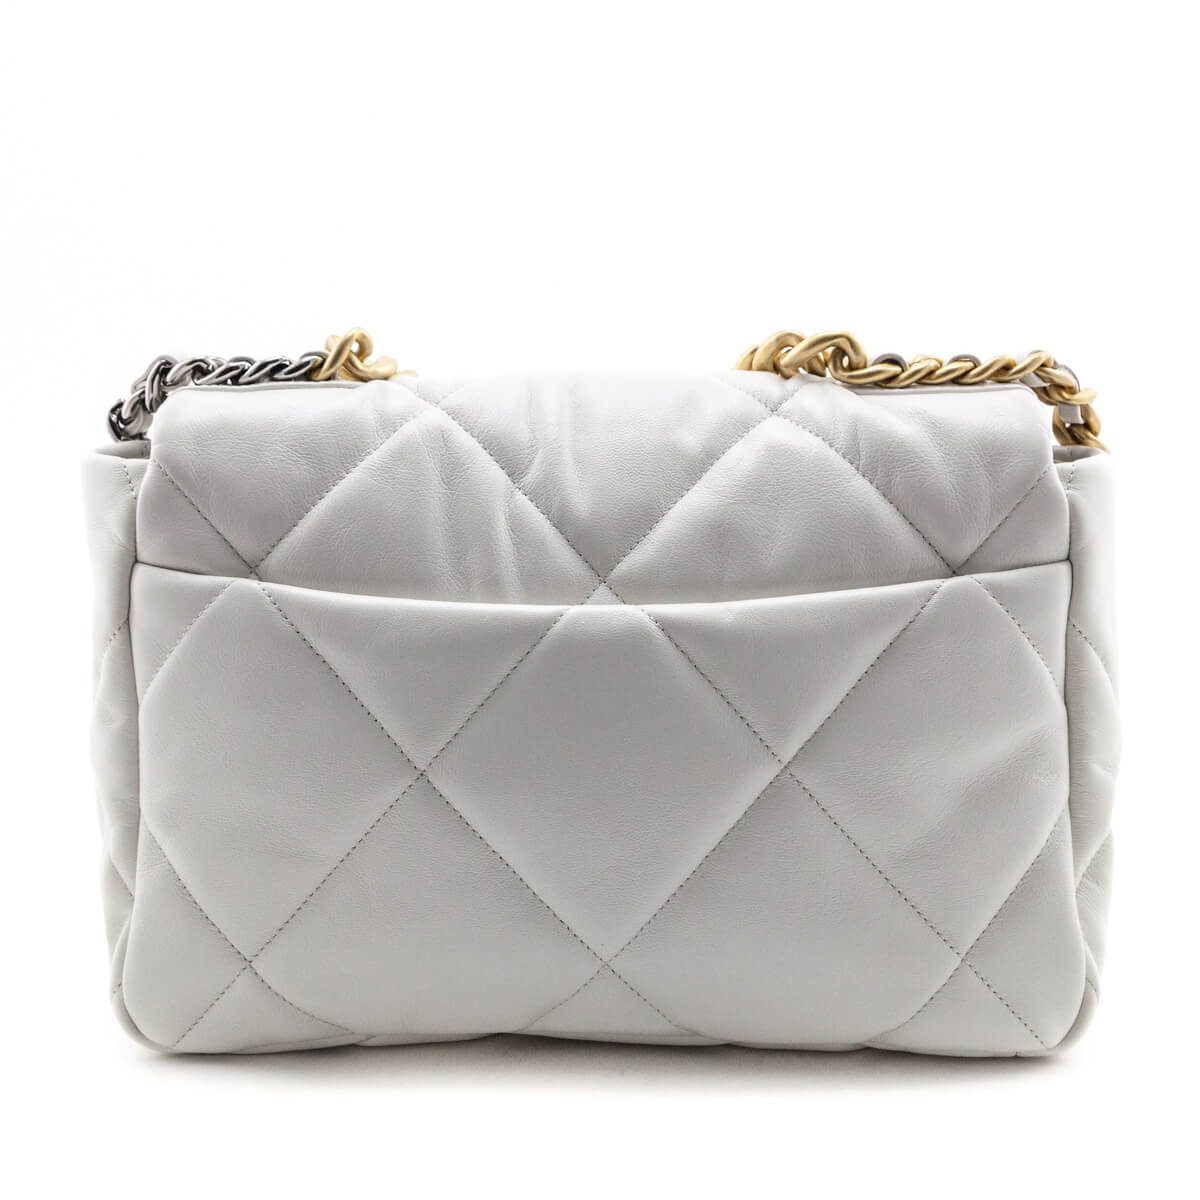 Chanel White Quilted Goatskin Chanel 19 Large Flap Bag – Love that